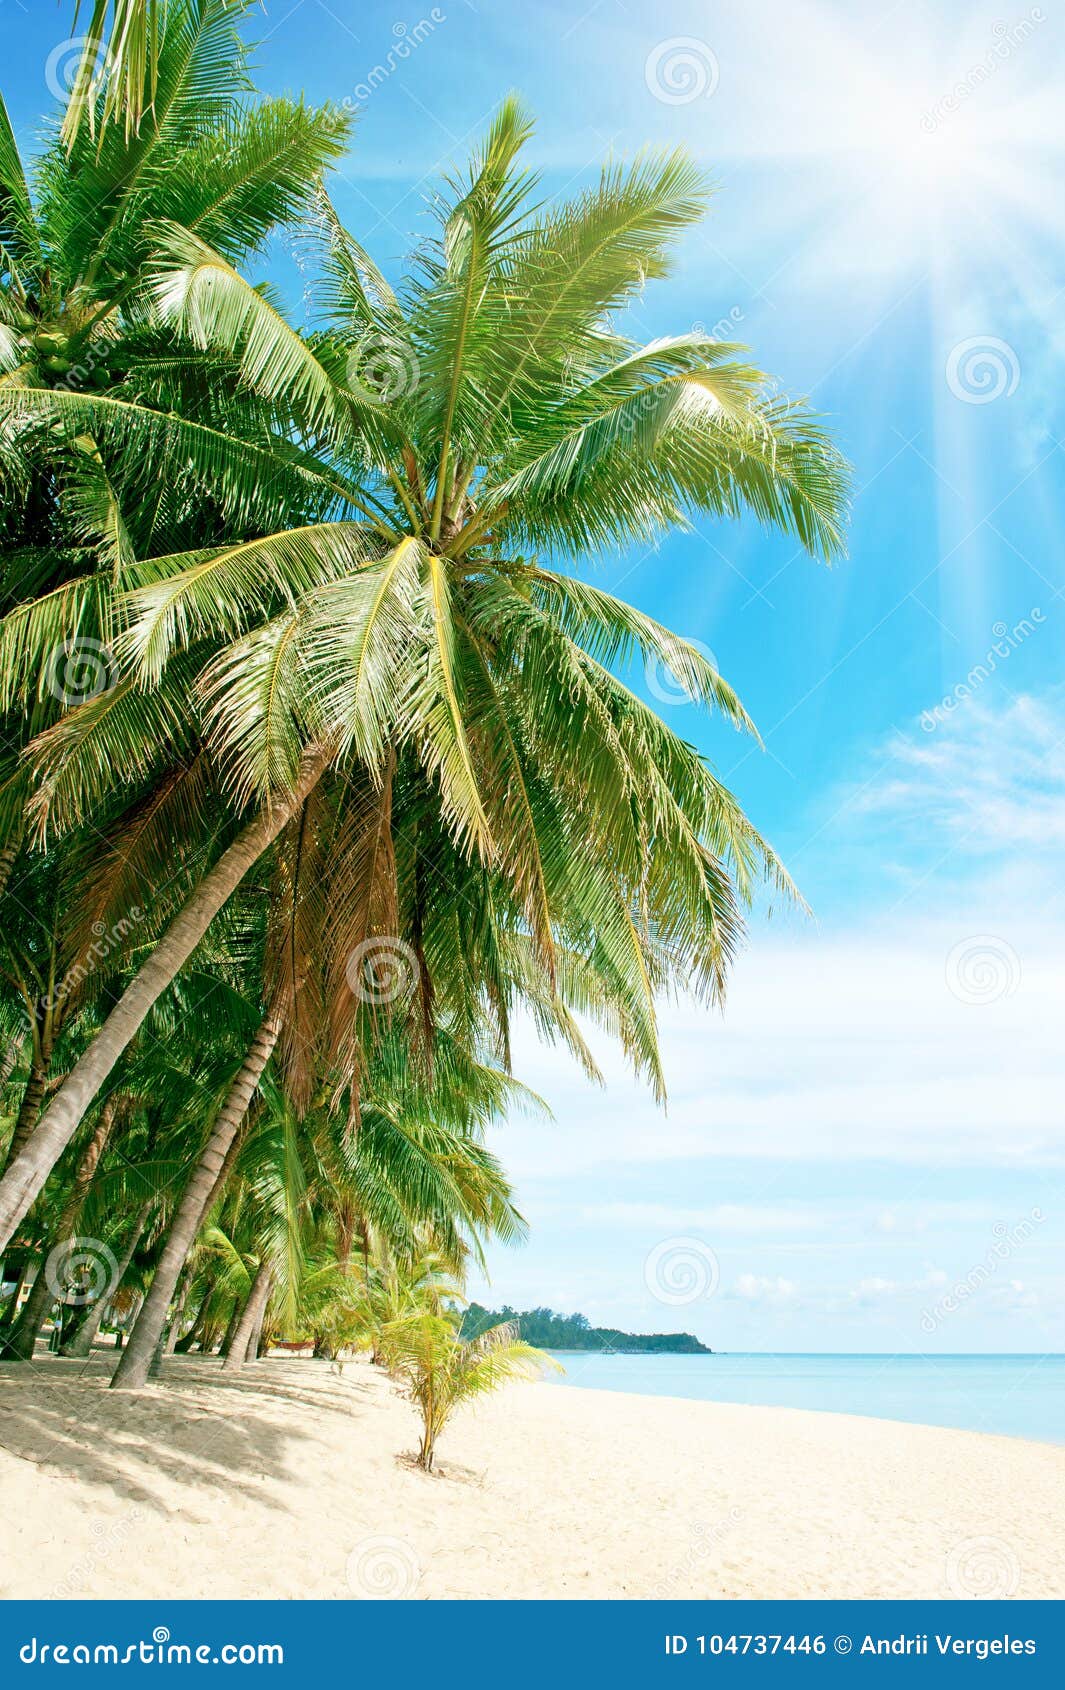 Beach with Palm Tree Over the Sand Stock Photo - Image of resort, beach ...